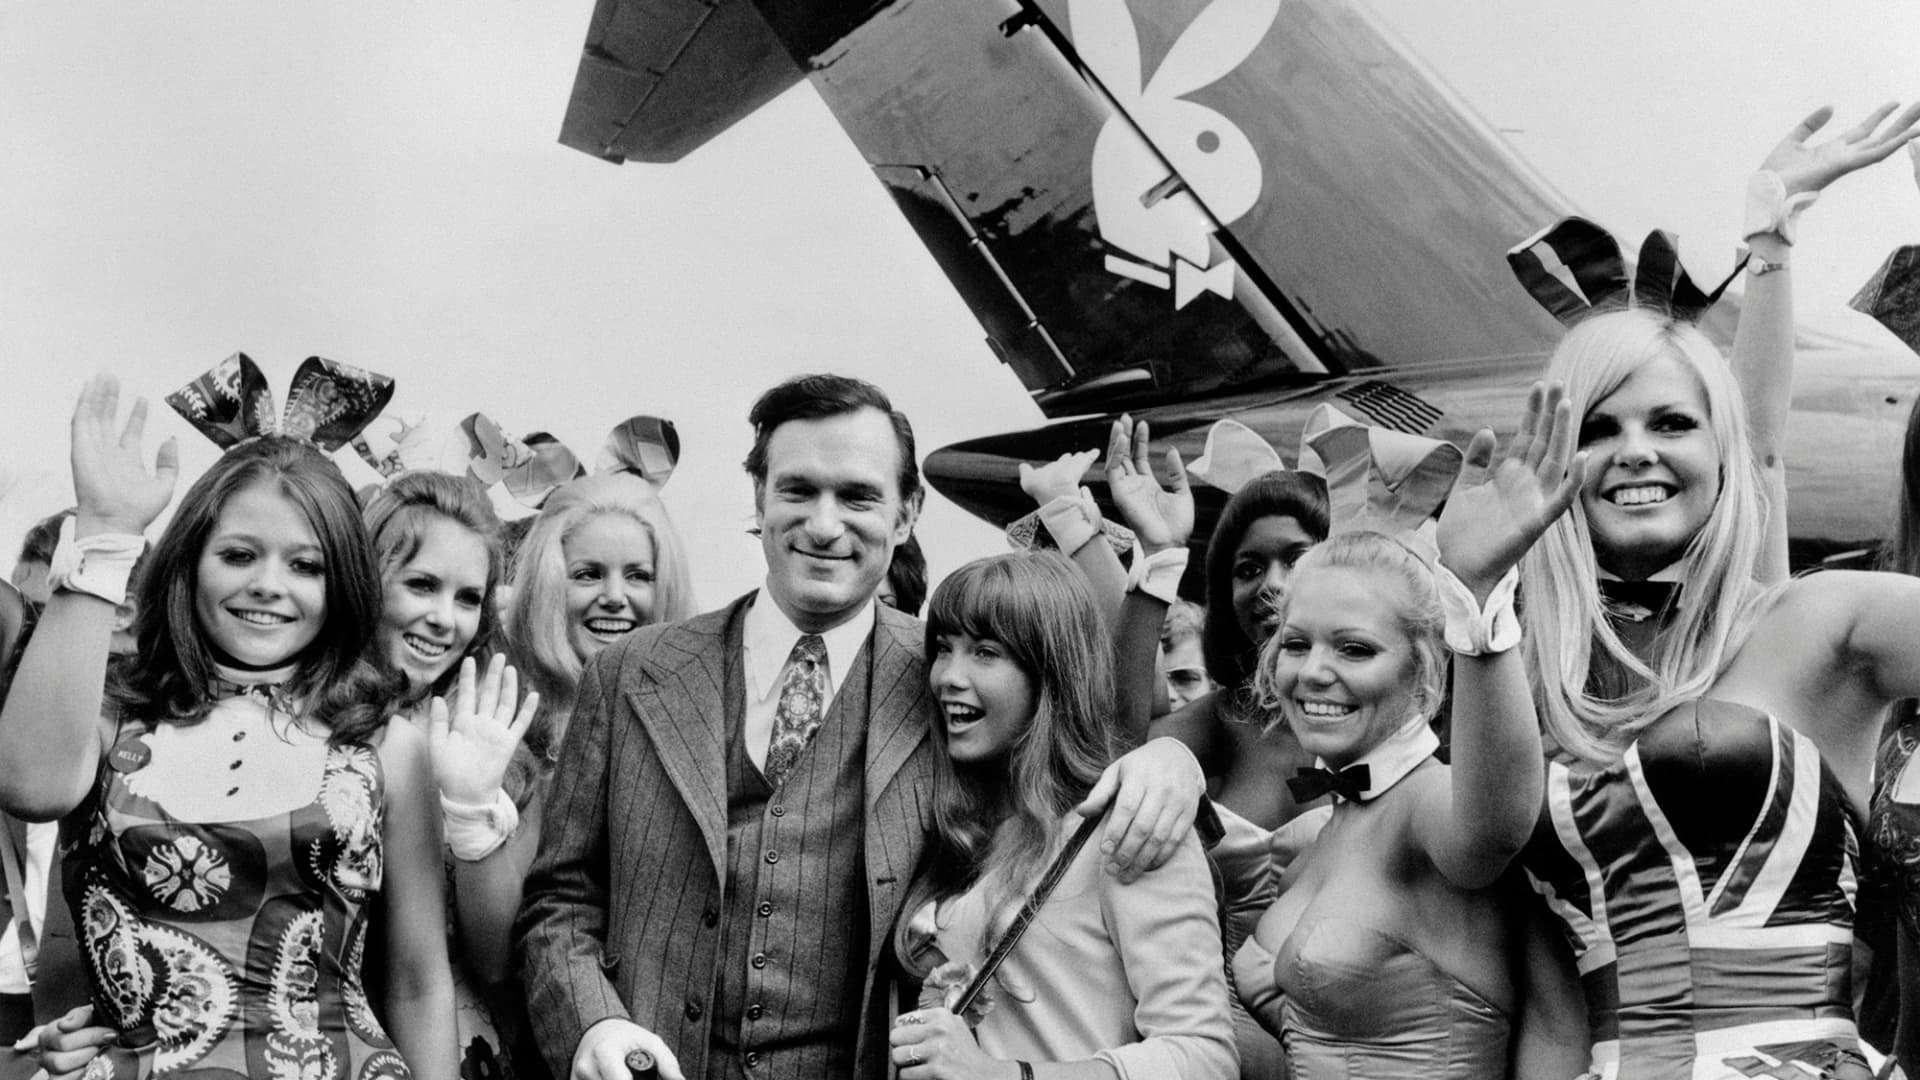 Photo taken on August 30, 1970 shows US Playboy Magazine publisher Hugh Hefner (top), his girlfriend actress Barbara Benton and other playmates arriving at Le Bourget airport with the Playboy jet 'Big Bunny'.